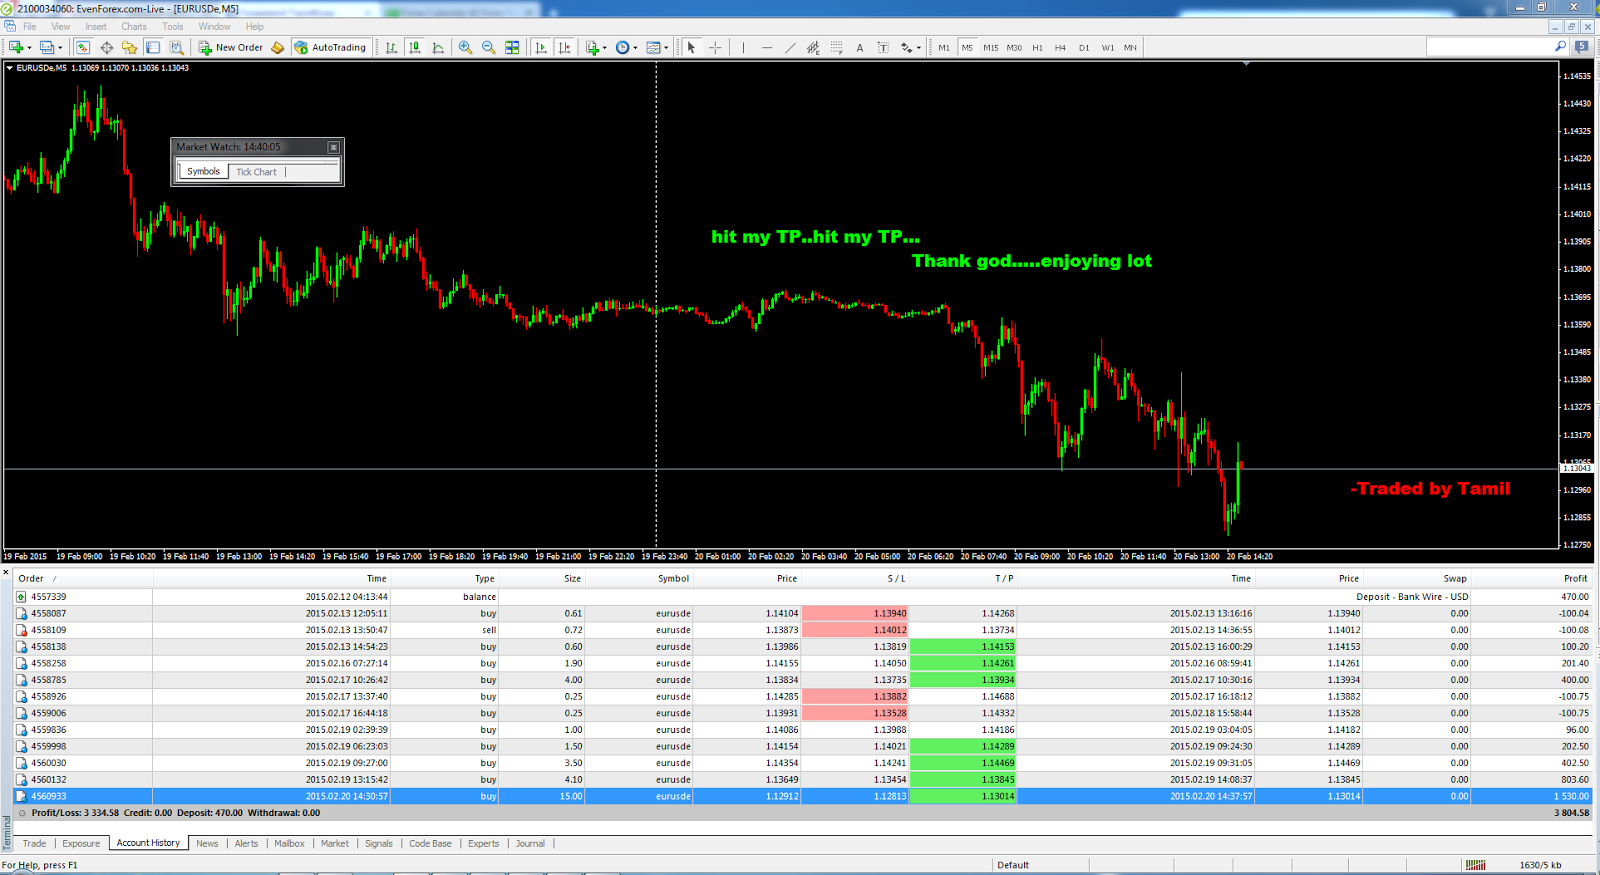 Best Forex Trading Platform,Trading Signals,Forex Investment,Forex Scalping,Forex Company